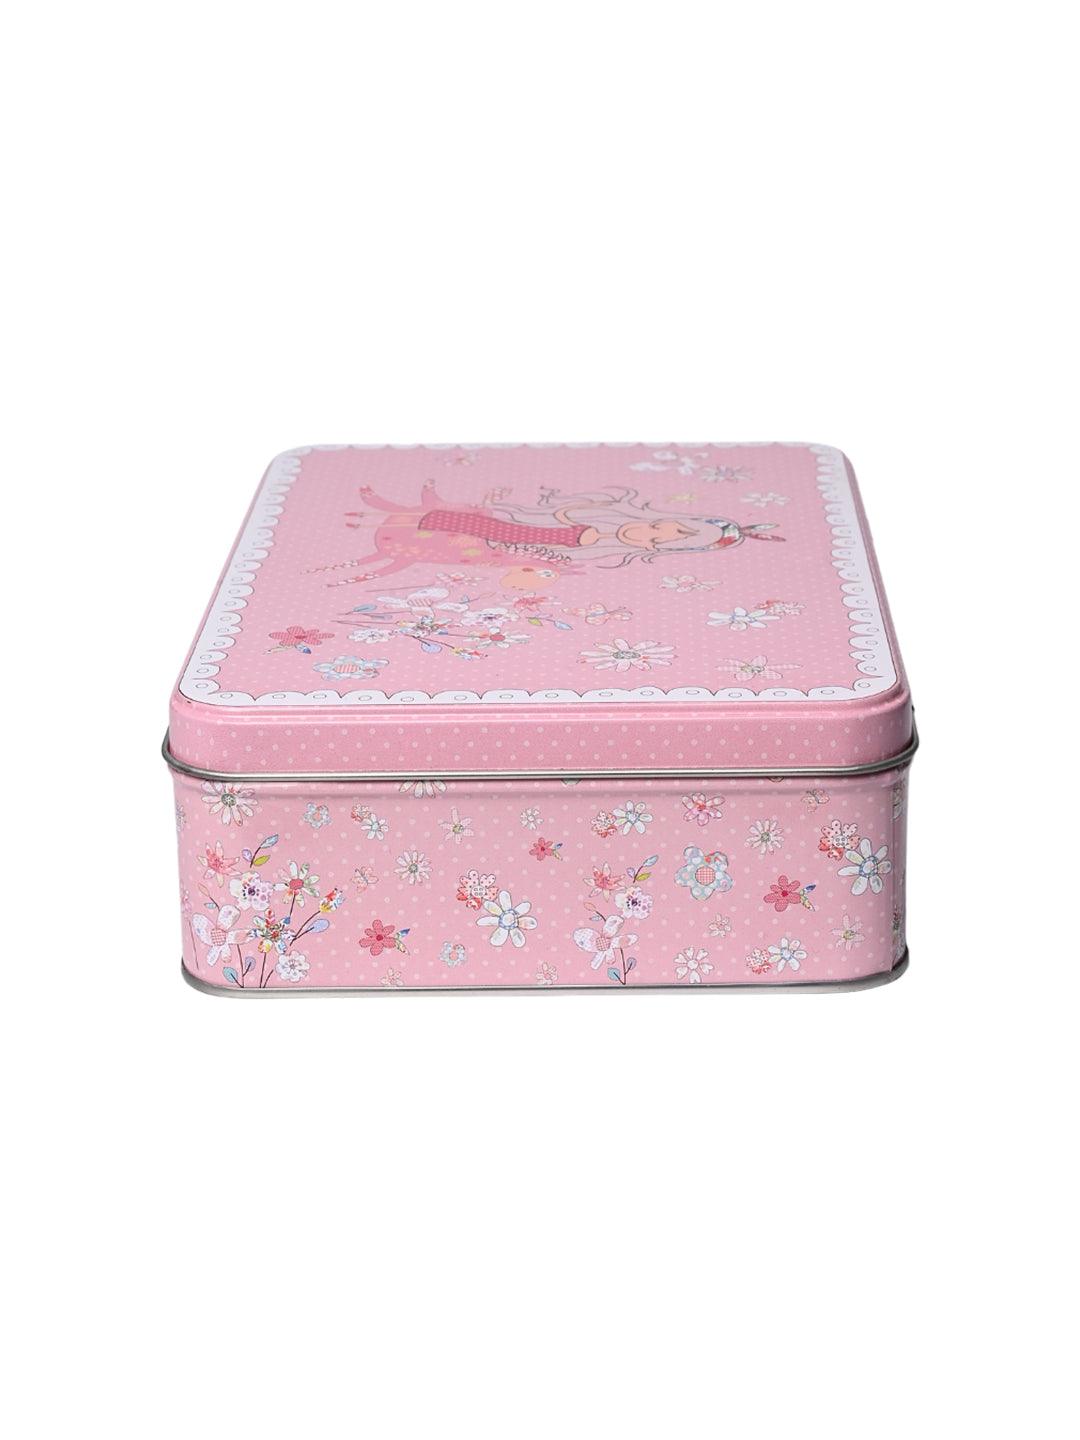 Floral Tin Storage Box Container - Set Of 6, Pink - MARKET99